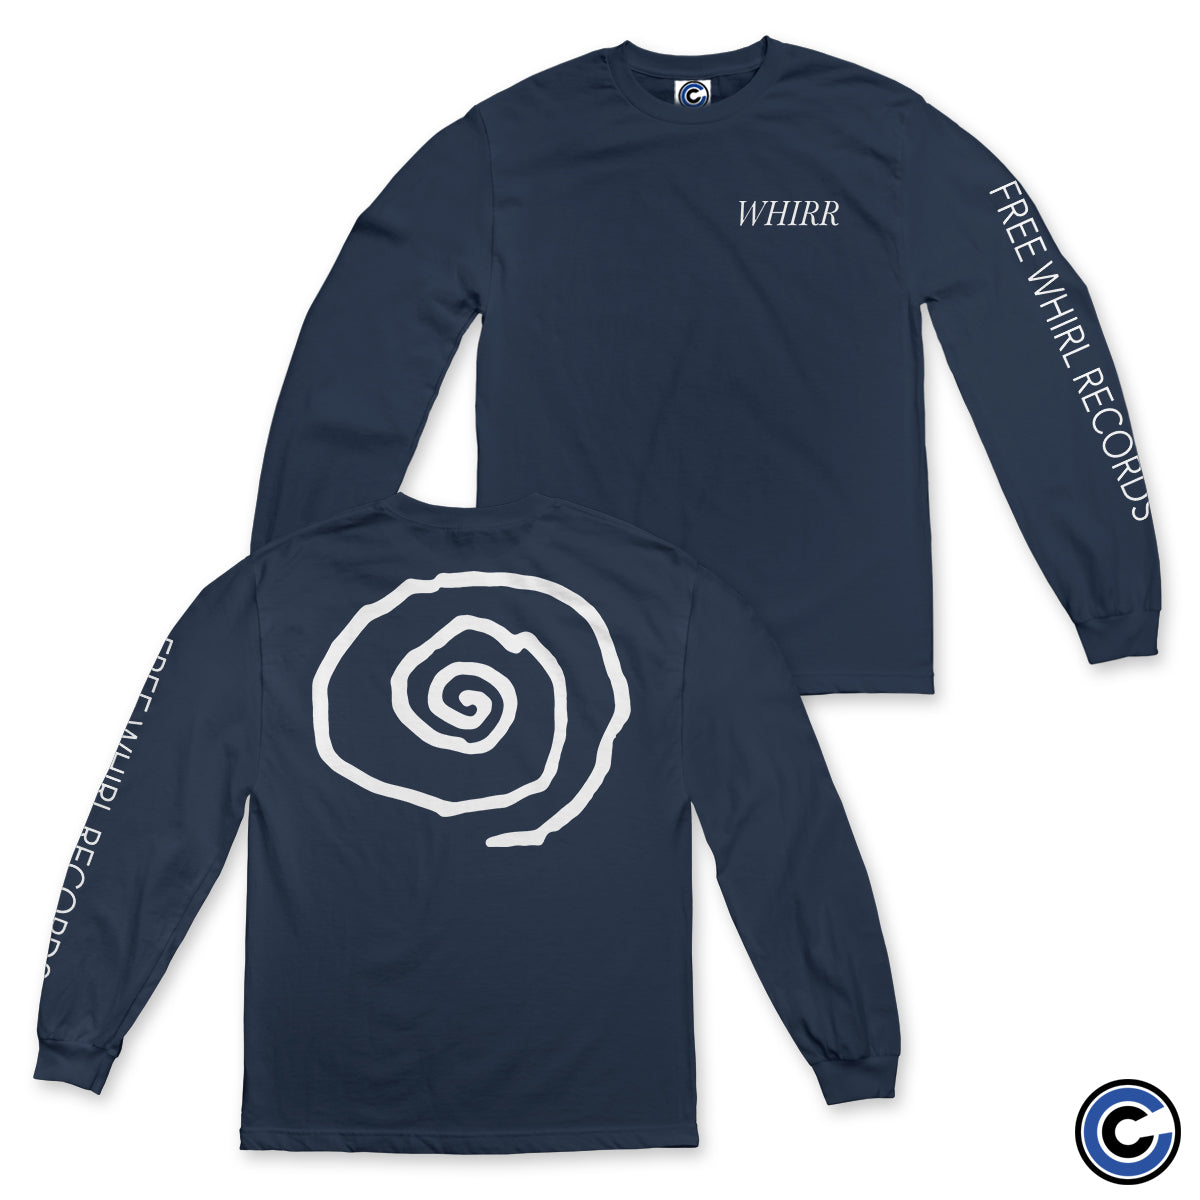 Whirr "Free Whirl" Long Sleeve